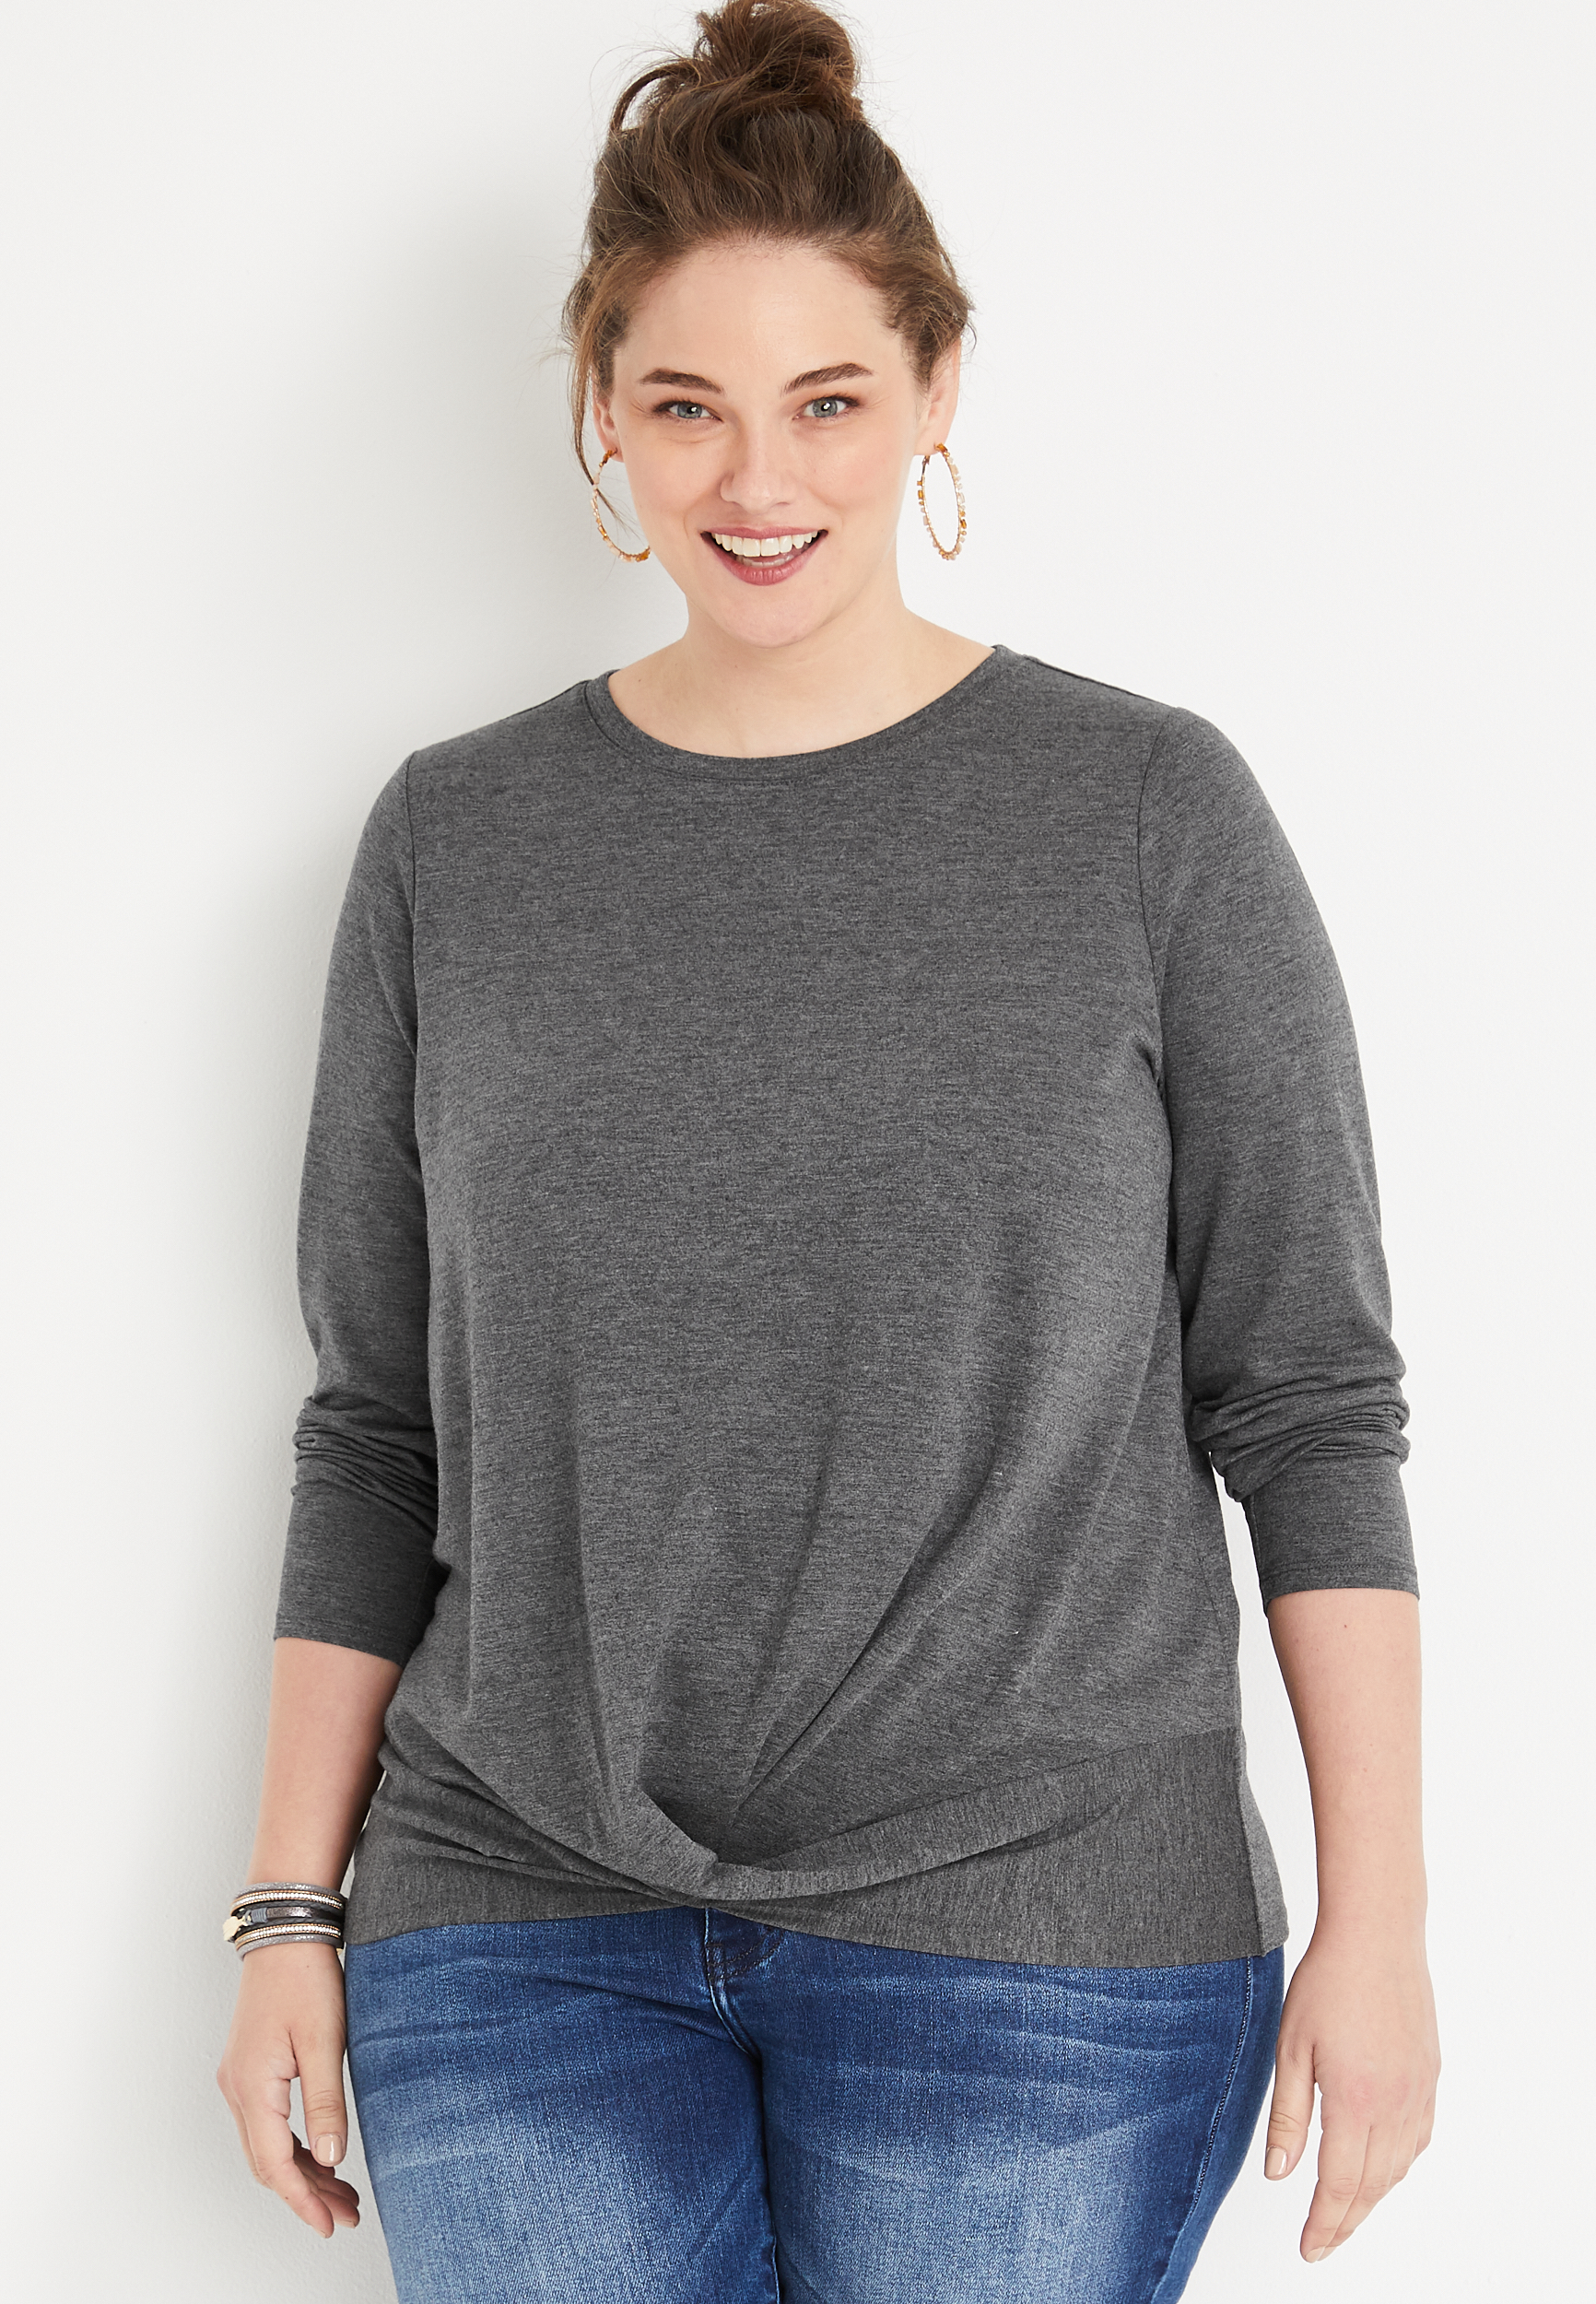 Plus Size 24/7 Solid Twisted Hem Long Sleeve Tee | maurices